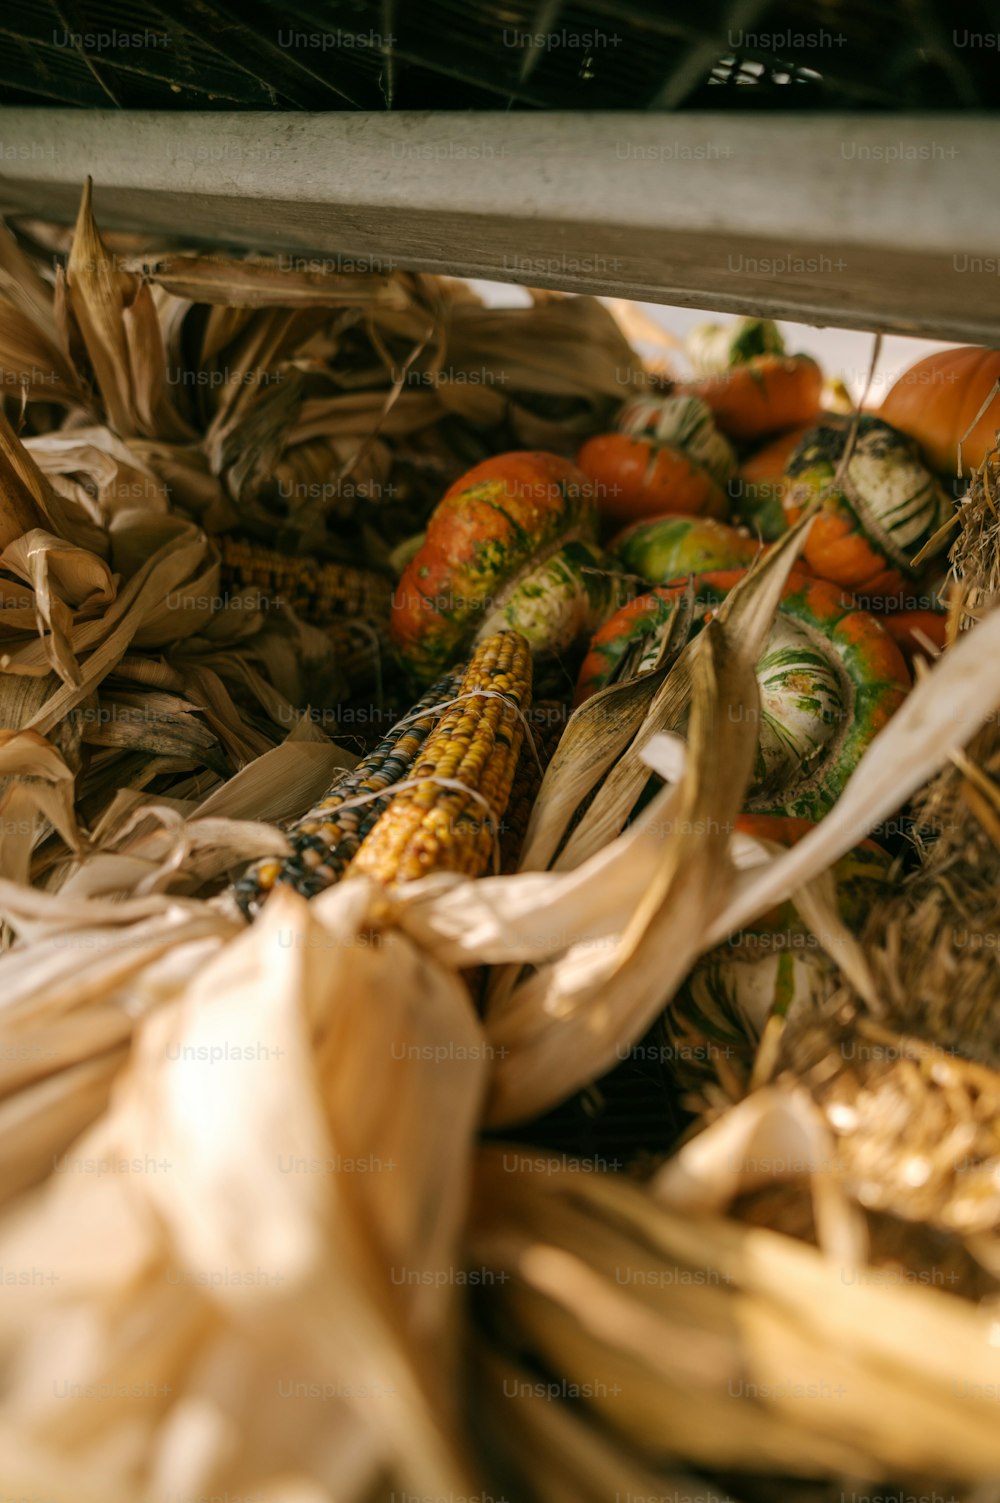 a corn cob and other vegetables in a bin